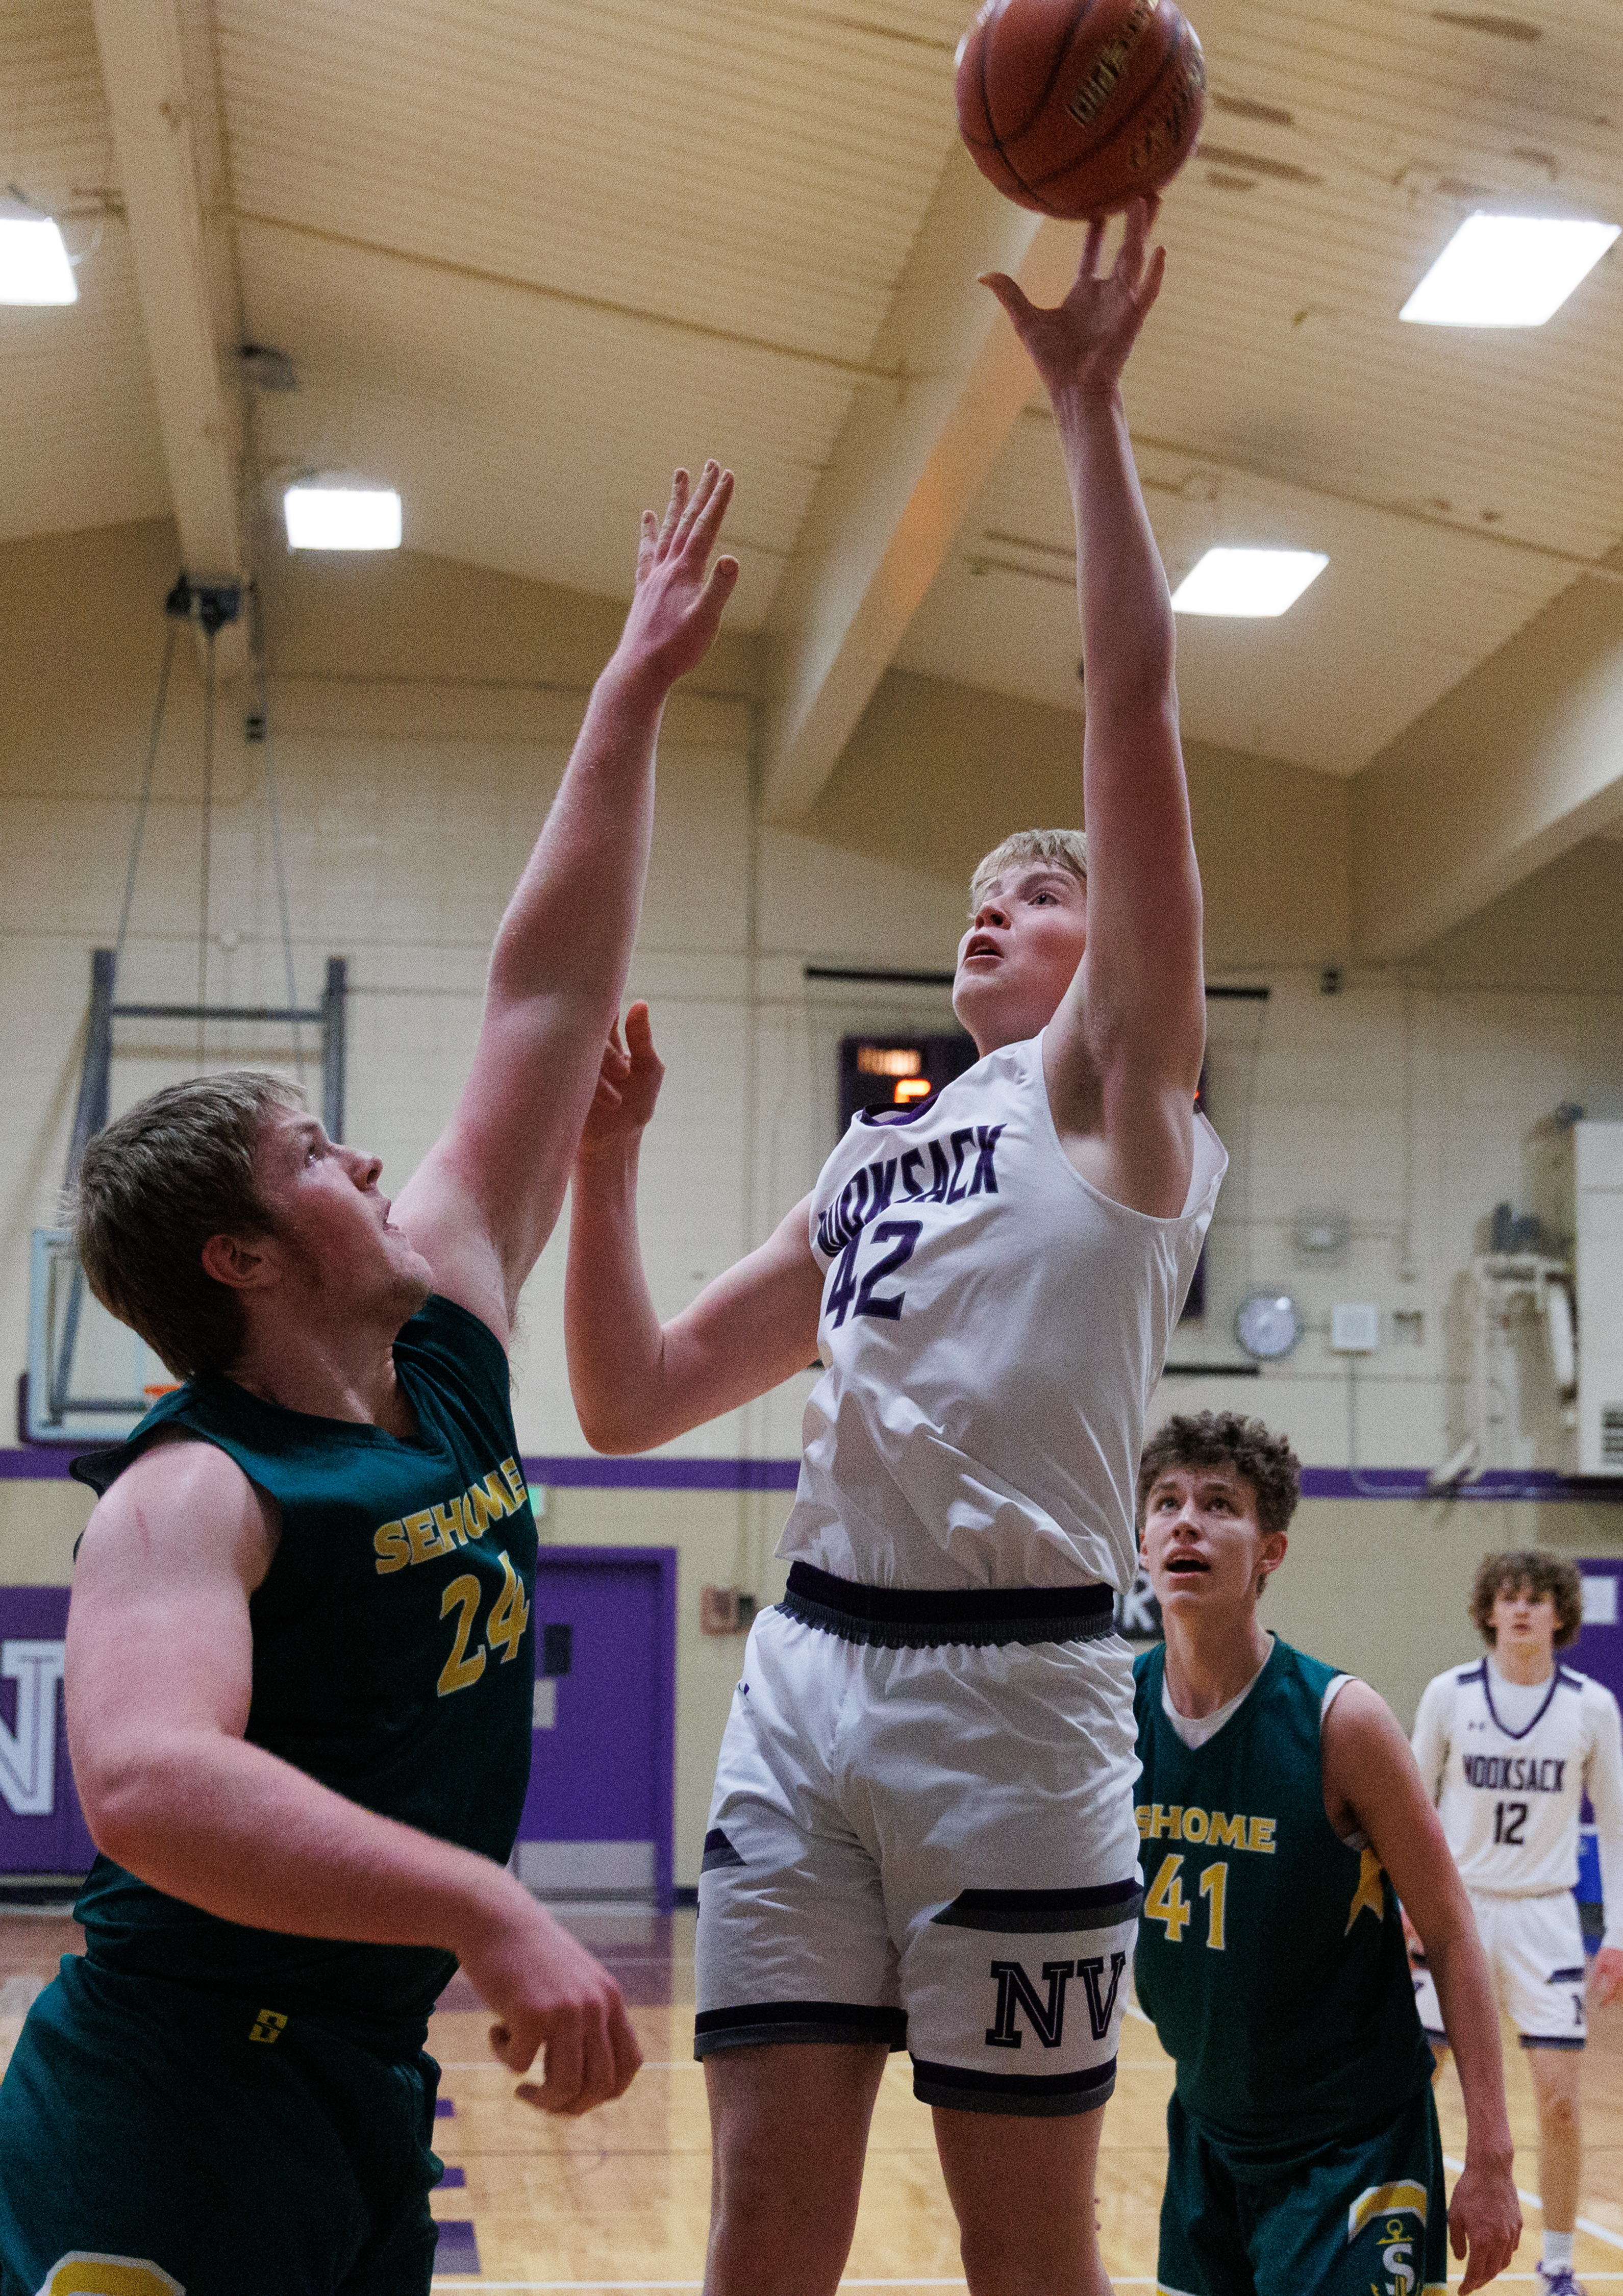 Sehome downs Nooksack Valley for 13th win